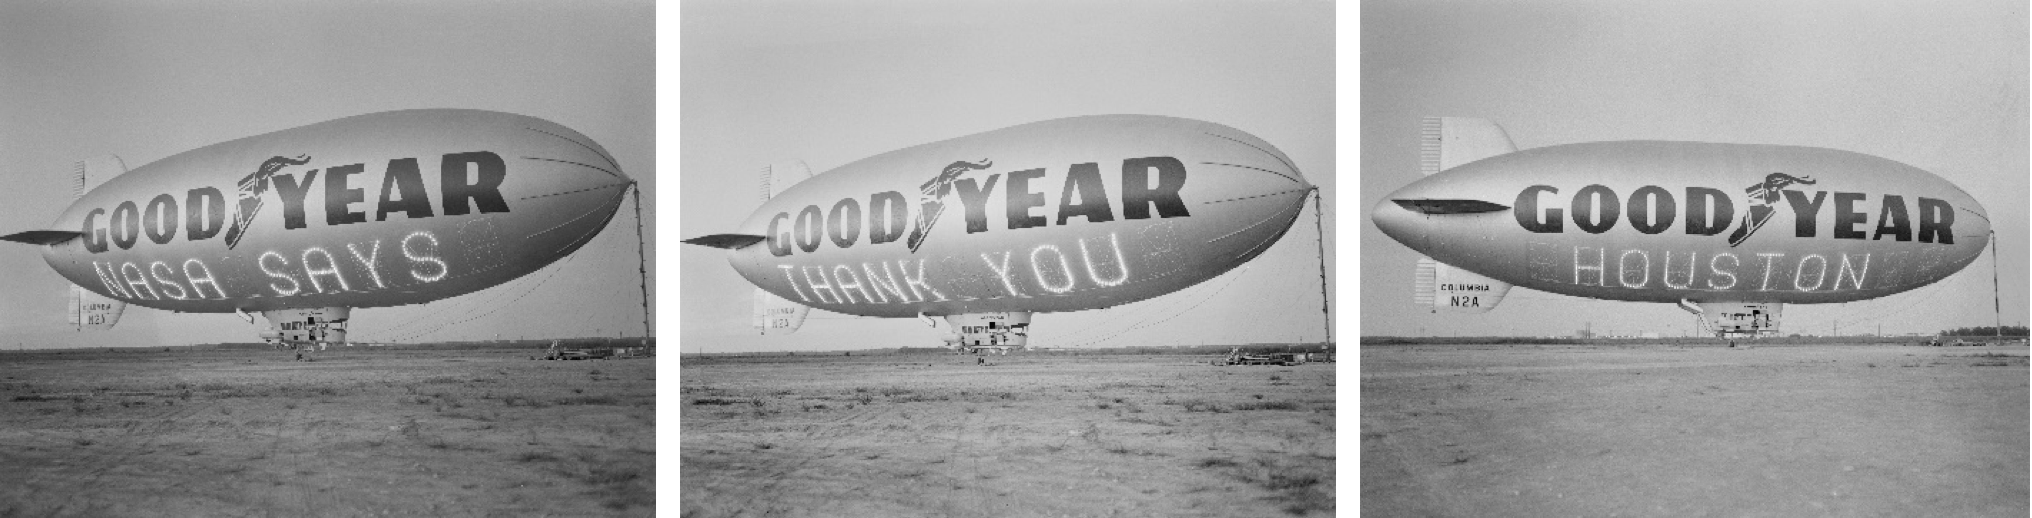 Good Year Blimp parked on the ground with the words NASA SAYS, THANK YOU, and HOUSTON shown on its side.